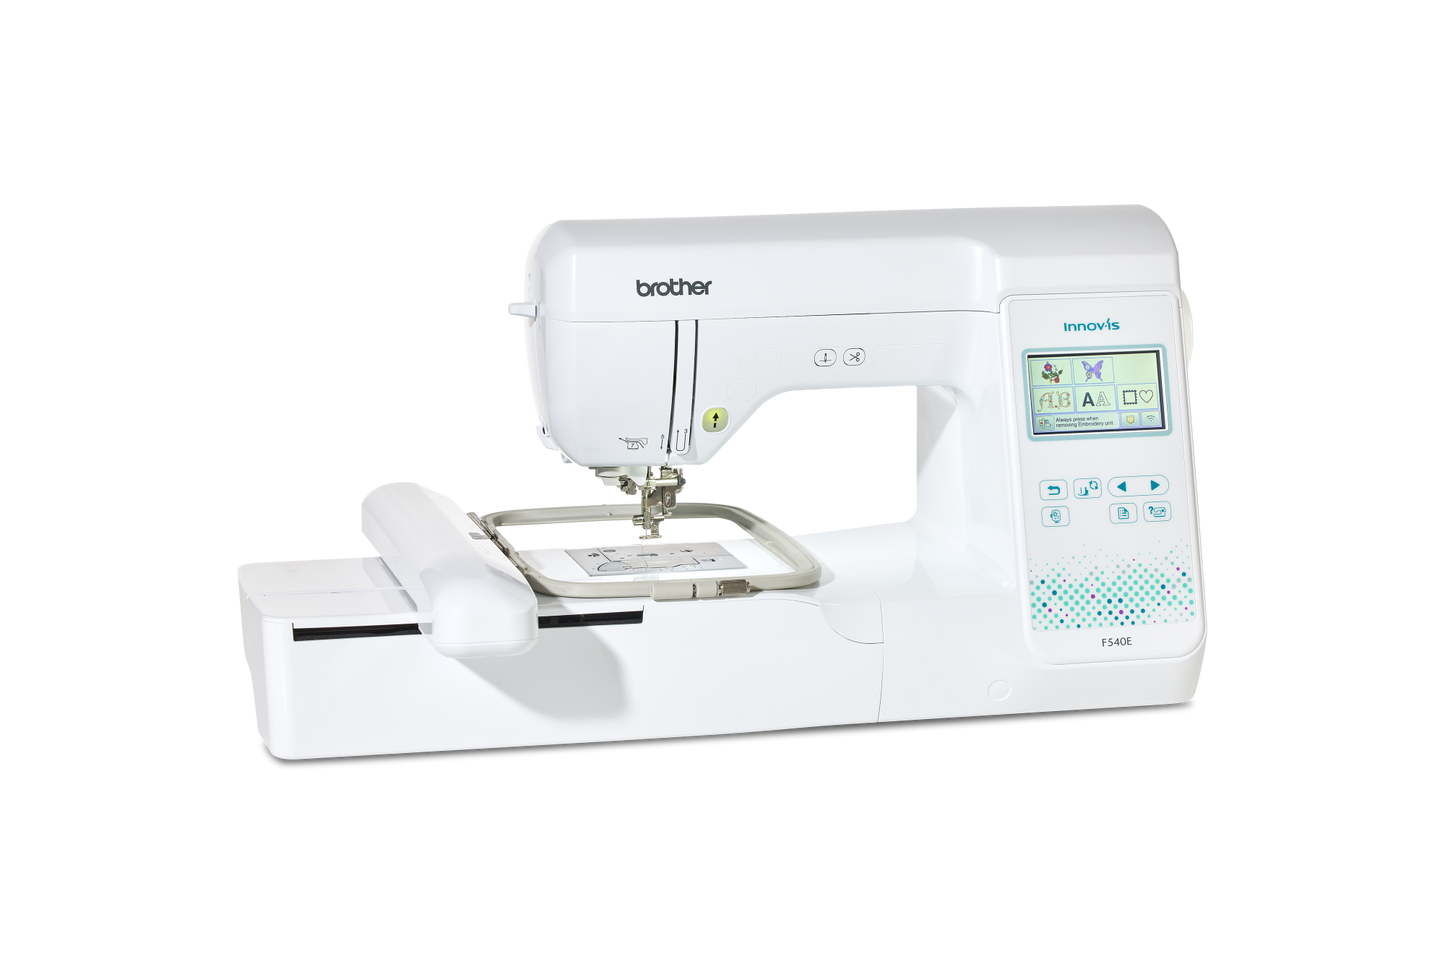 Brother Innovis F540E Embroidery Machine OFFER